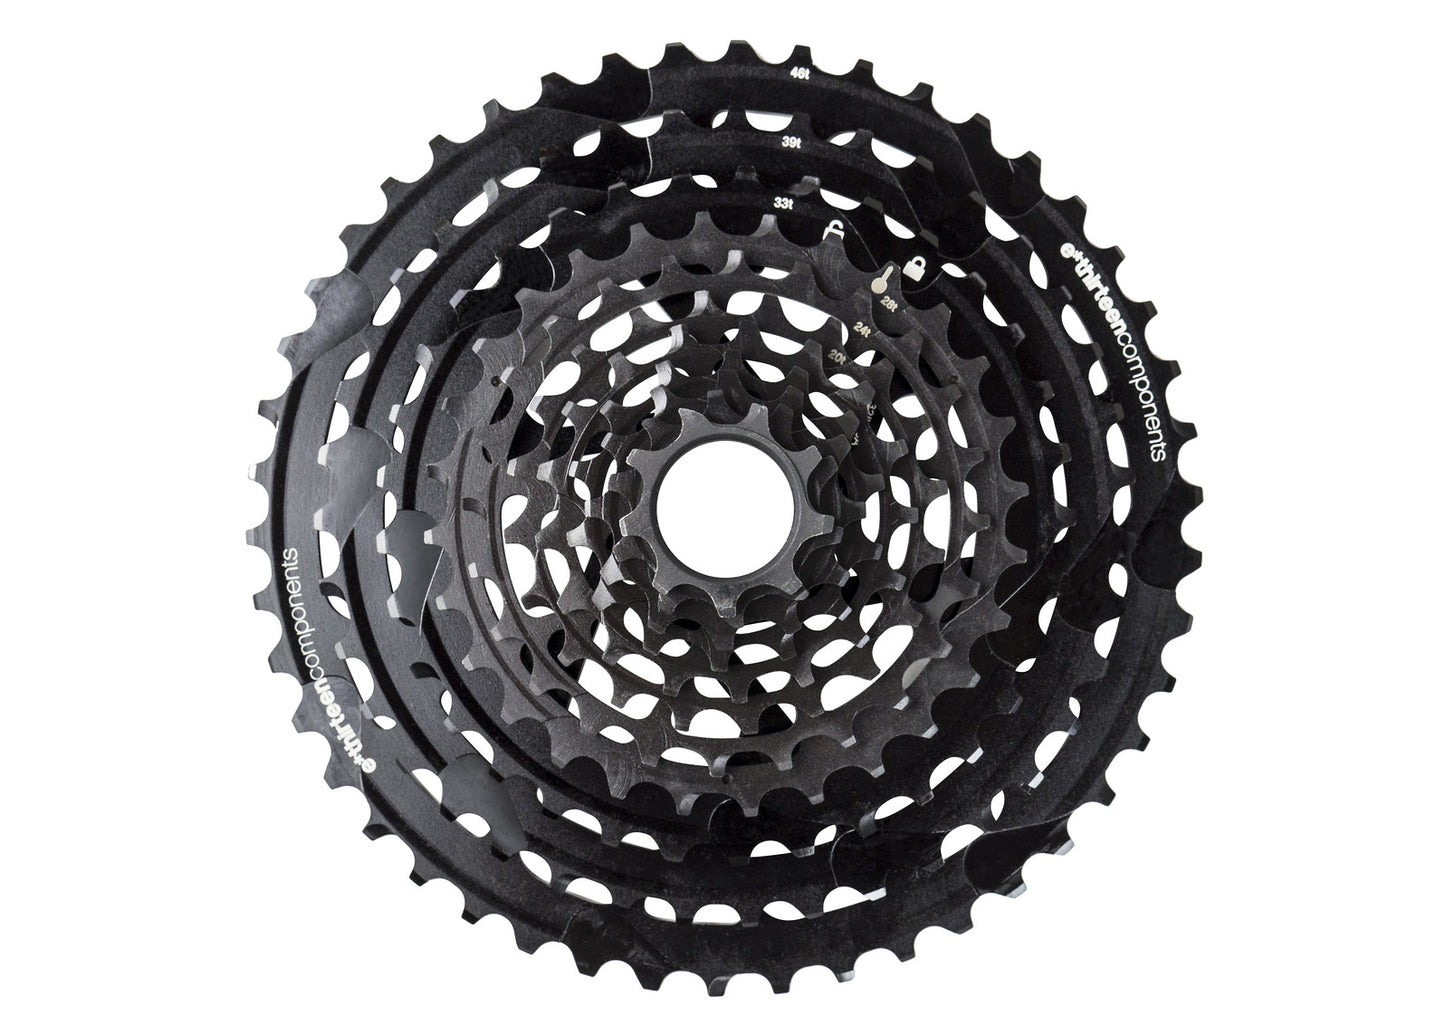 E13 TRS+ 9-46 11S CASSETTE GN2 - Smith Creek Cycle